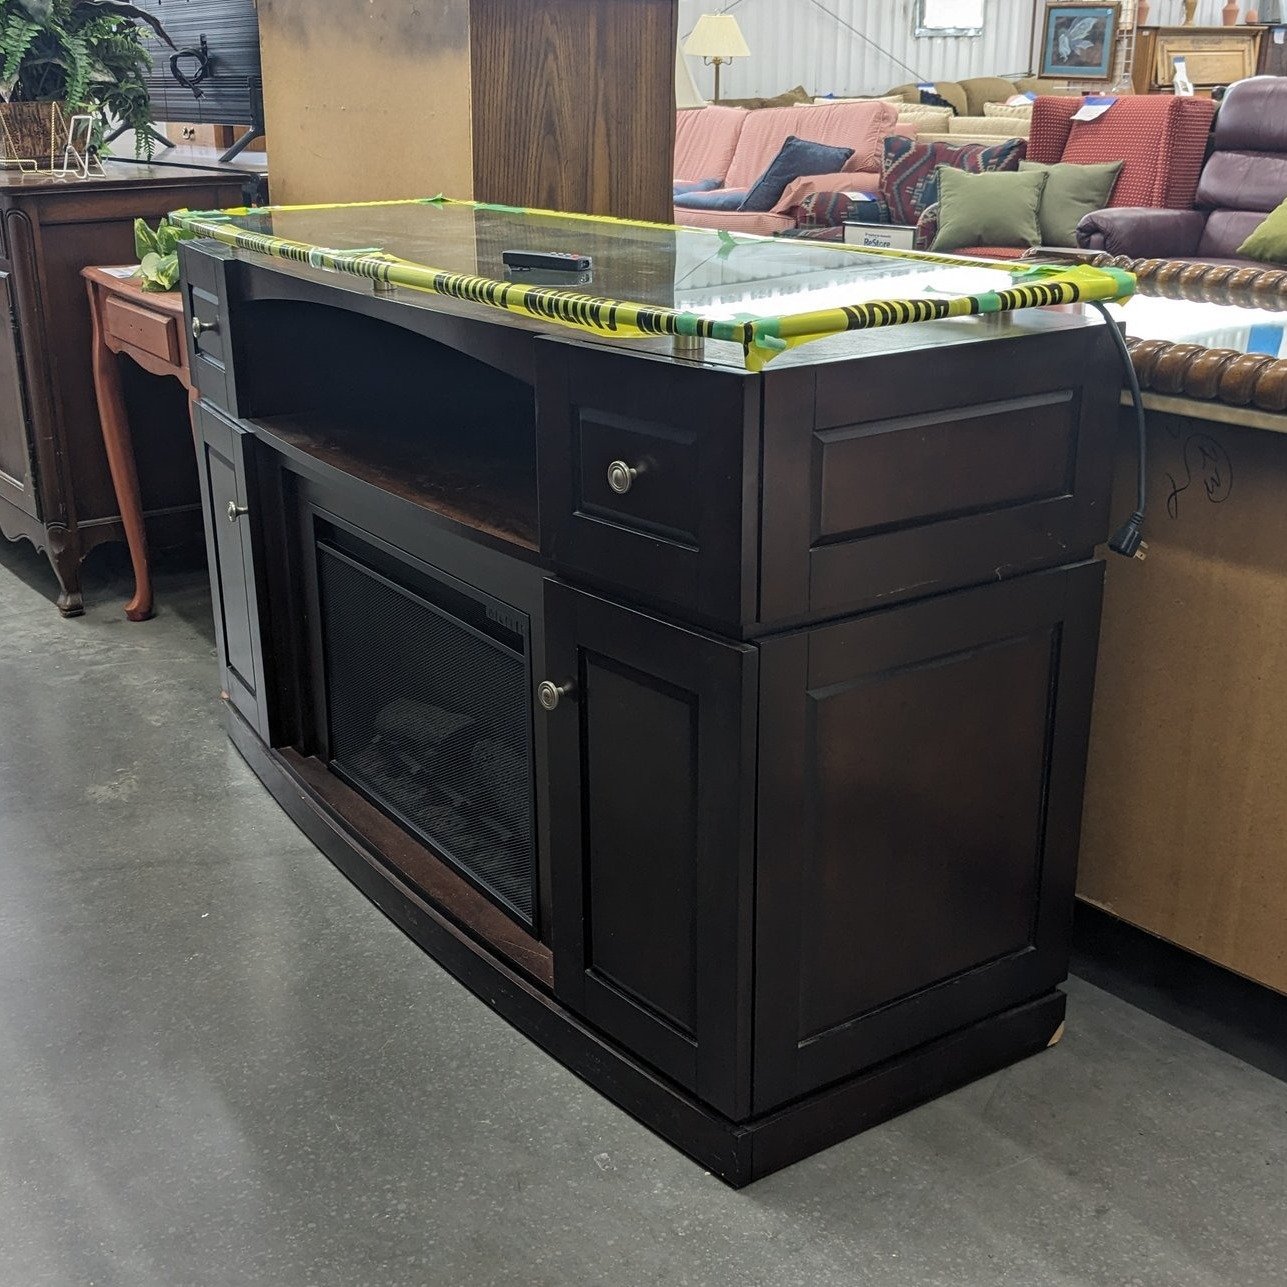 📣Latest in donations at the Longmont ReStore
Twin Star International Electric Fireplace with Remote
Approximate measurements: 5' L x 2' W x 3'H
Model 26EF022SRA
$199.99
💙💚💙
Help build the story of home. 
Shop. Donate. Volunteer.
💙💚💙
 #Longmont